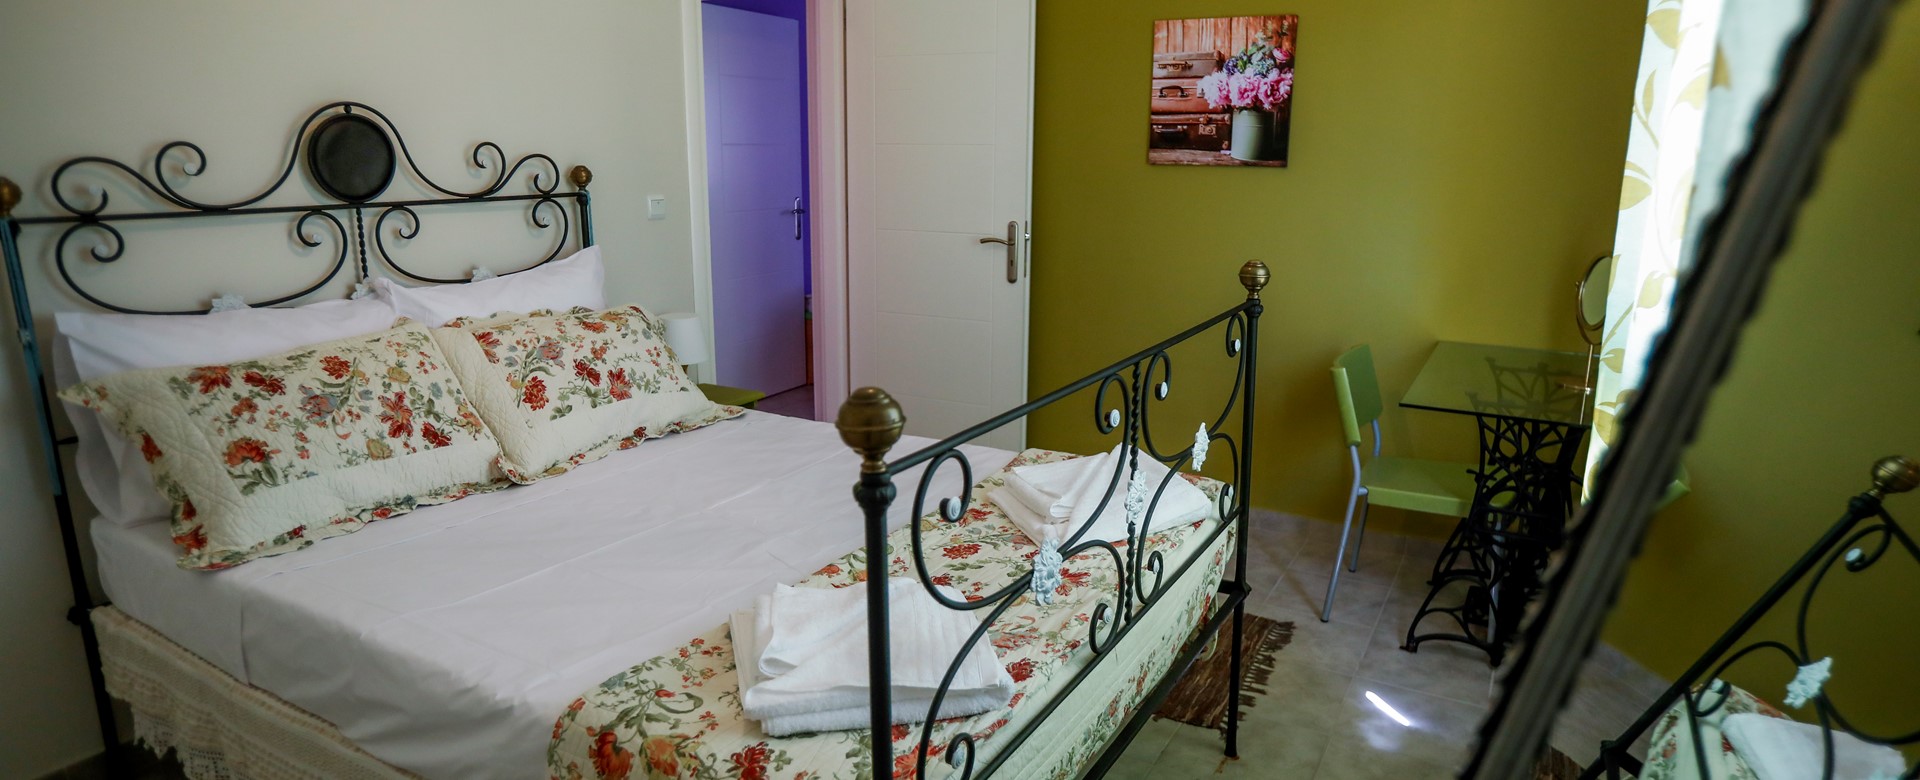 Cosy double bedroom at Rosie's Herb Cottage, Assos, Kefalonia, Greek Islands